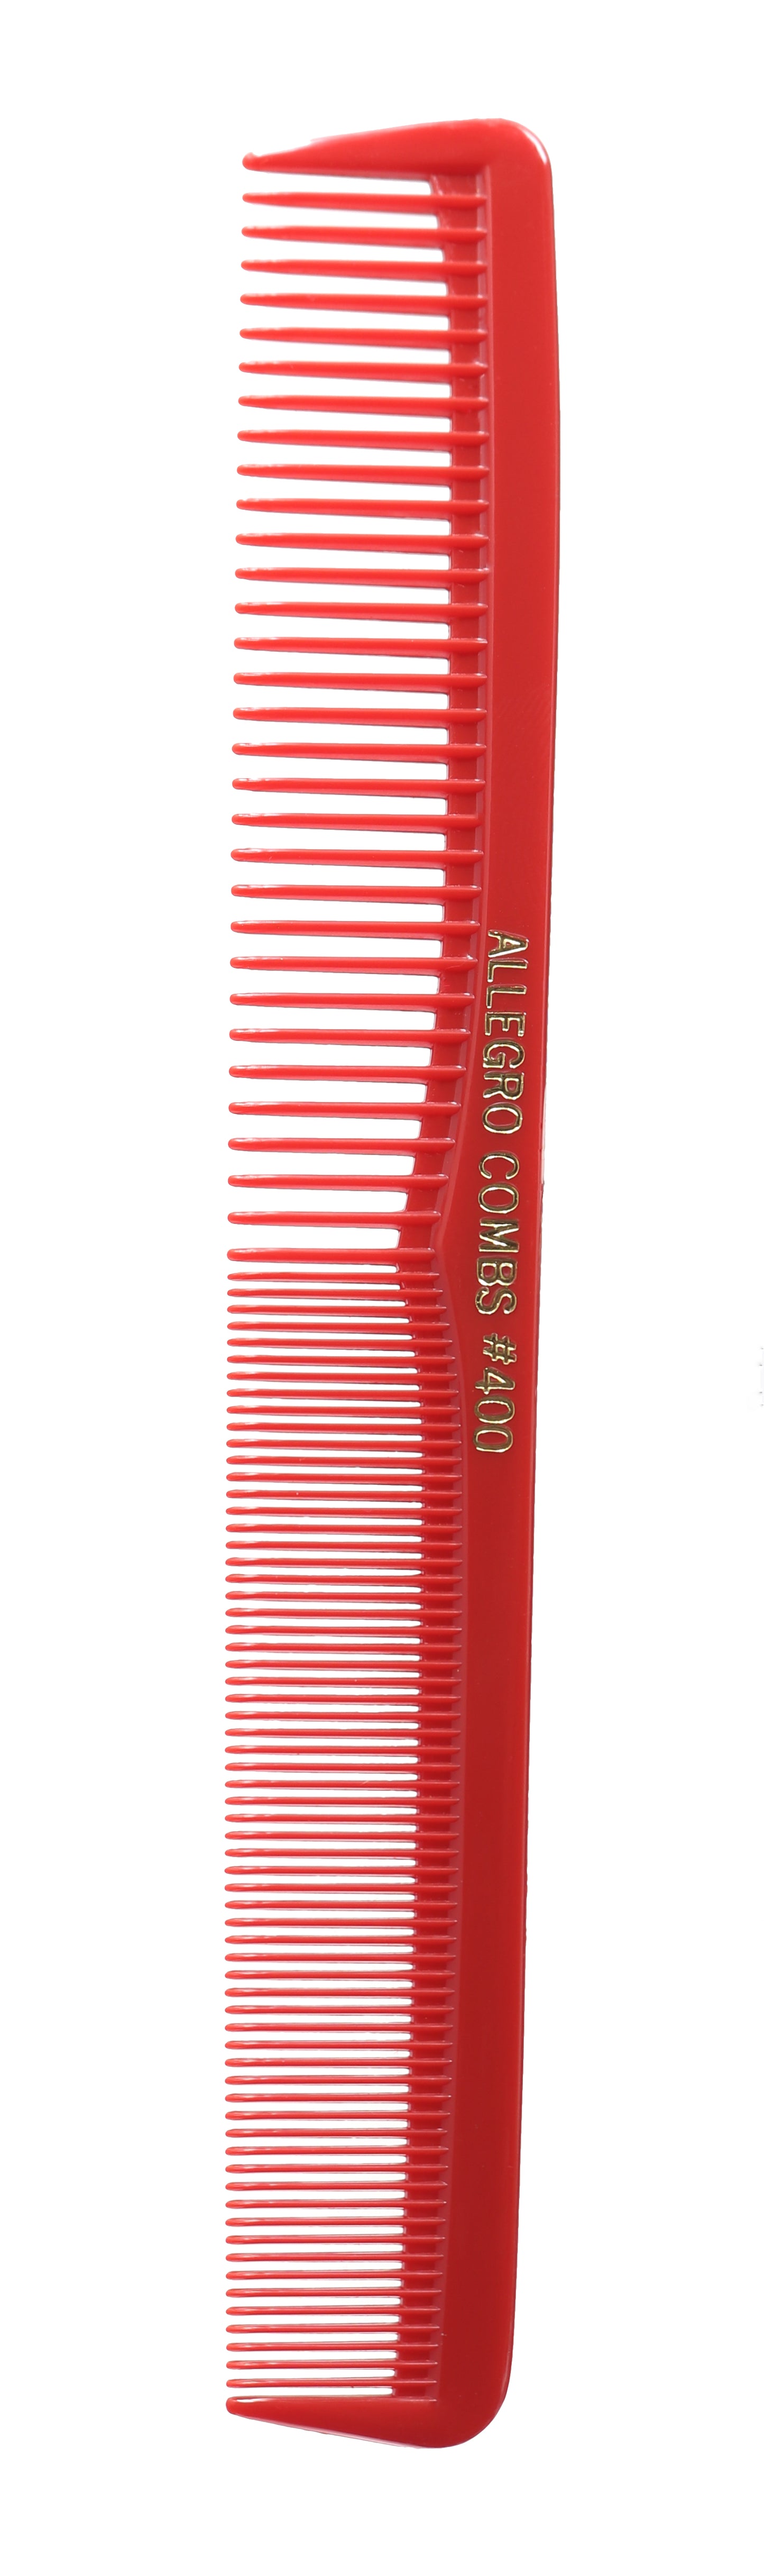 Allegro Combs 400 Barbers Combs Cutting Combs All Purpose Combs Red Combs. 12 Pk